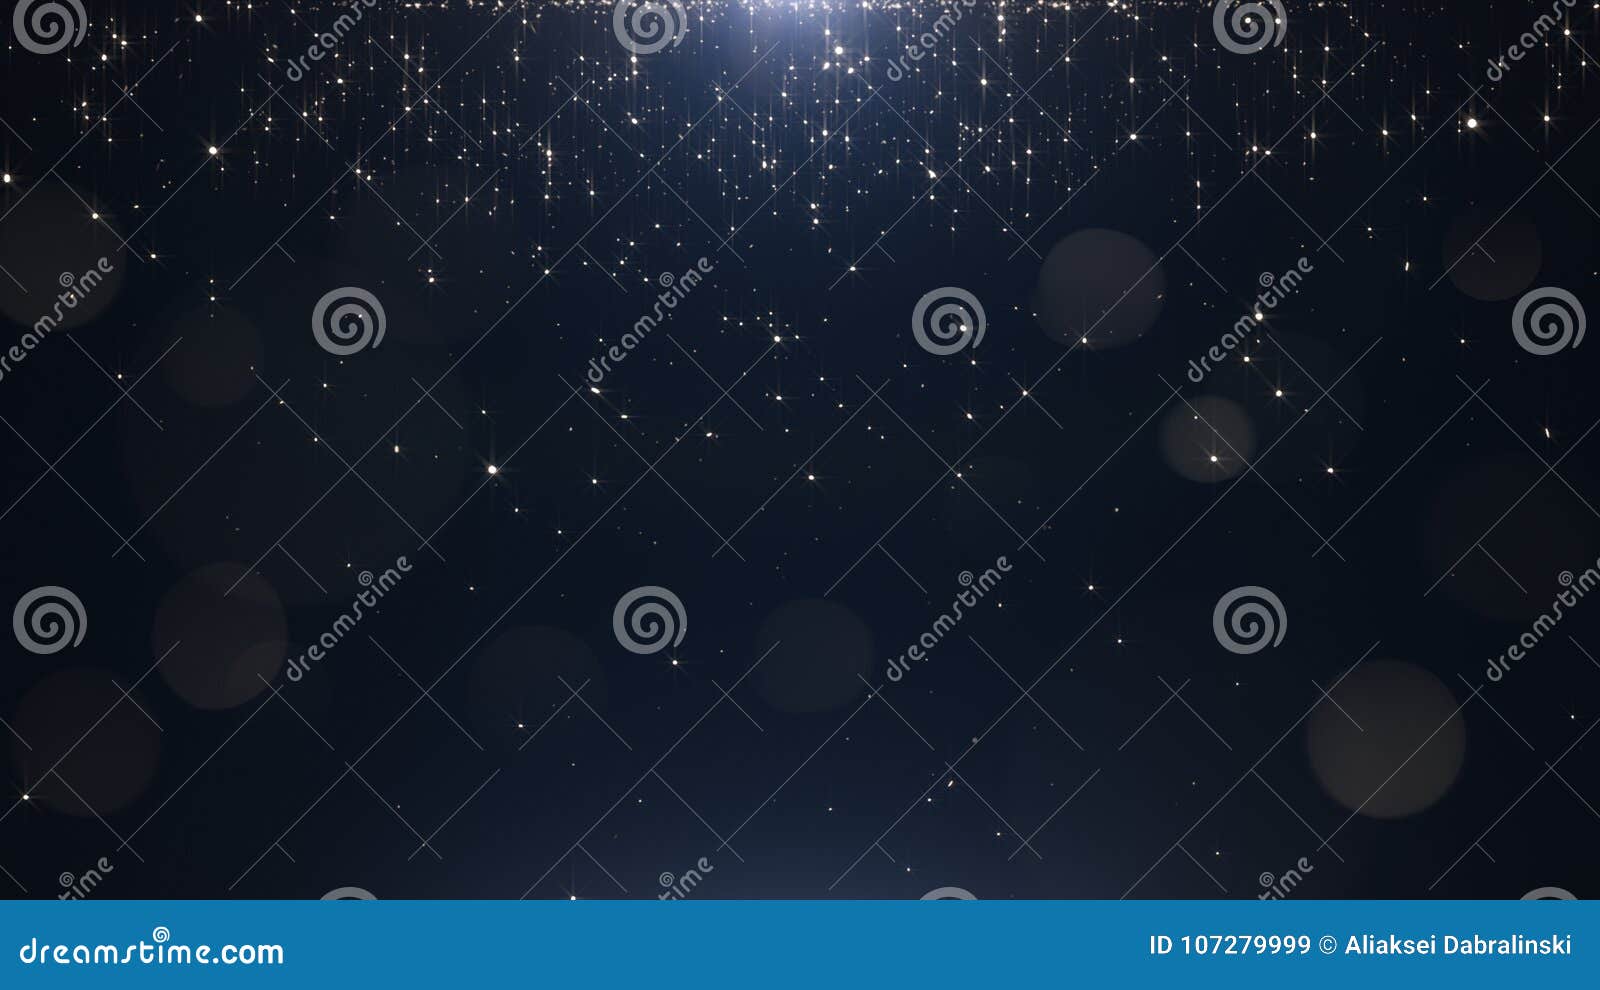 glamorous golden particles on a black background